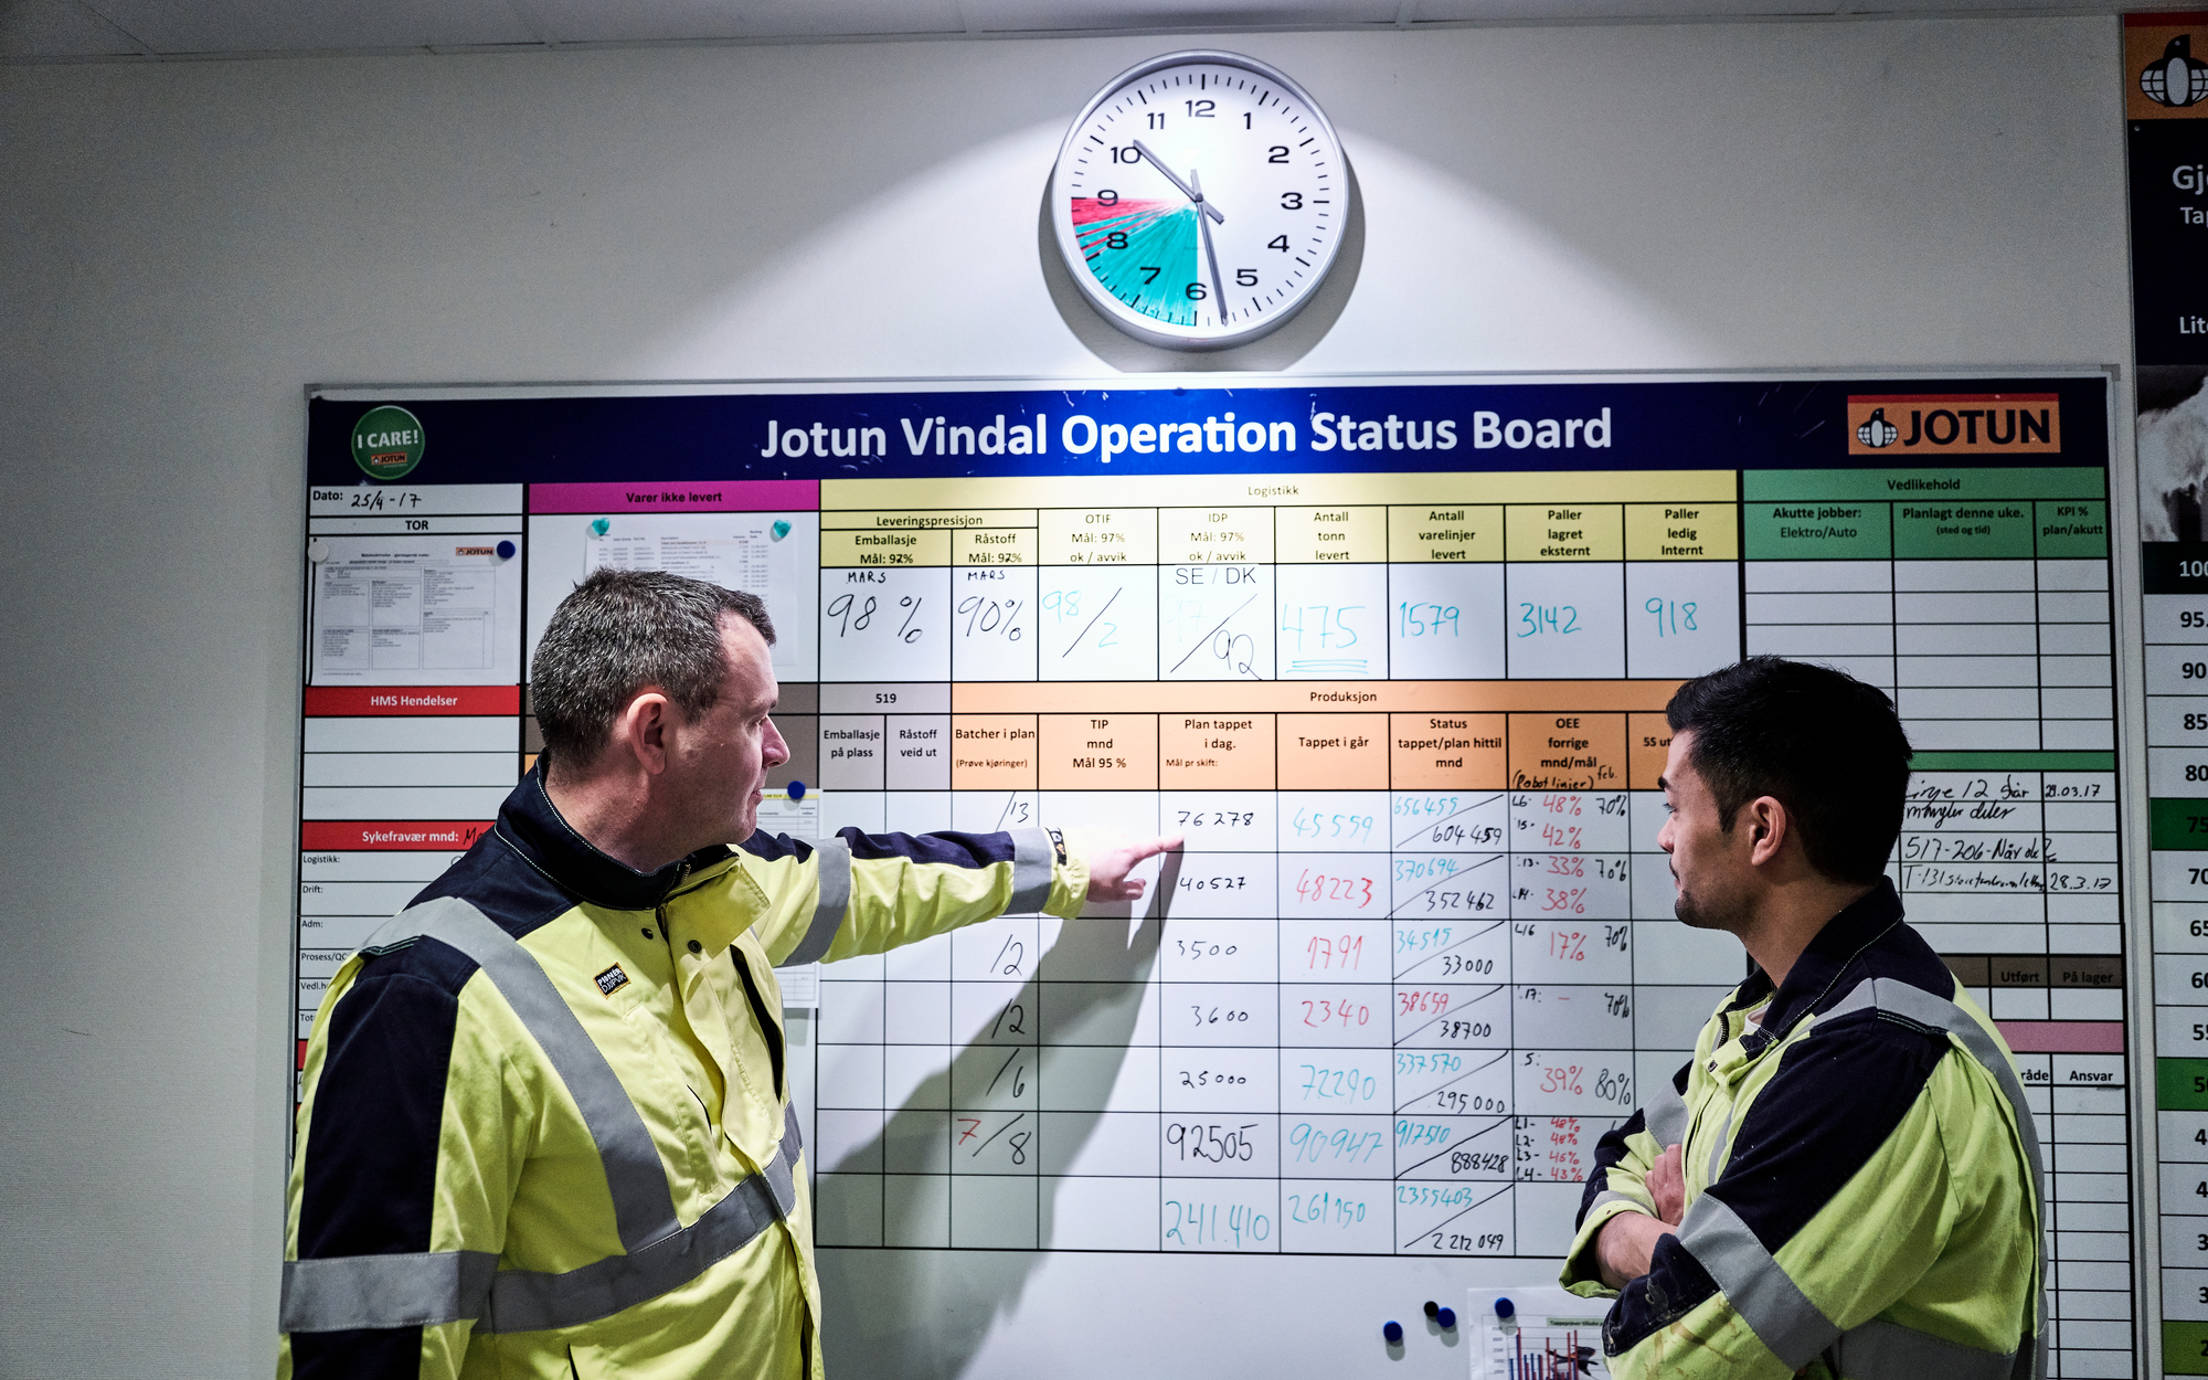 Two factory workers looking at the KPI status board in Jotun's Vindal factory in Norway.